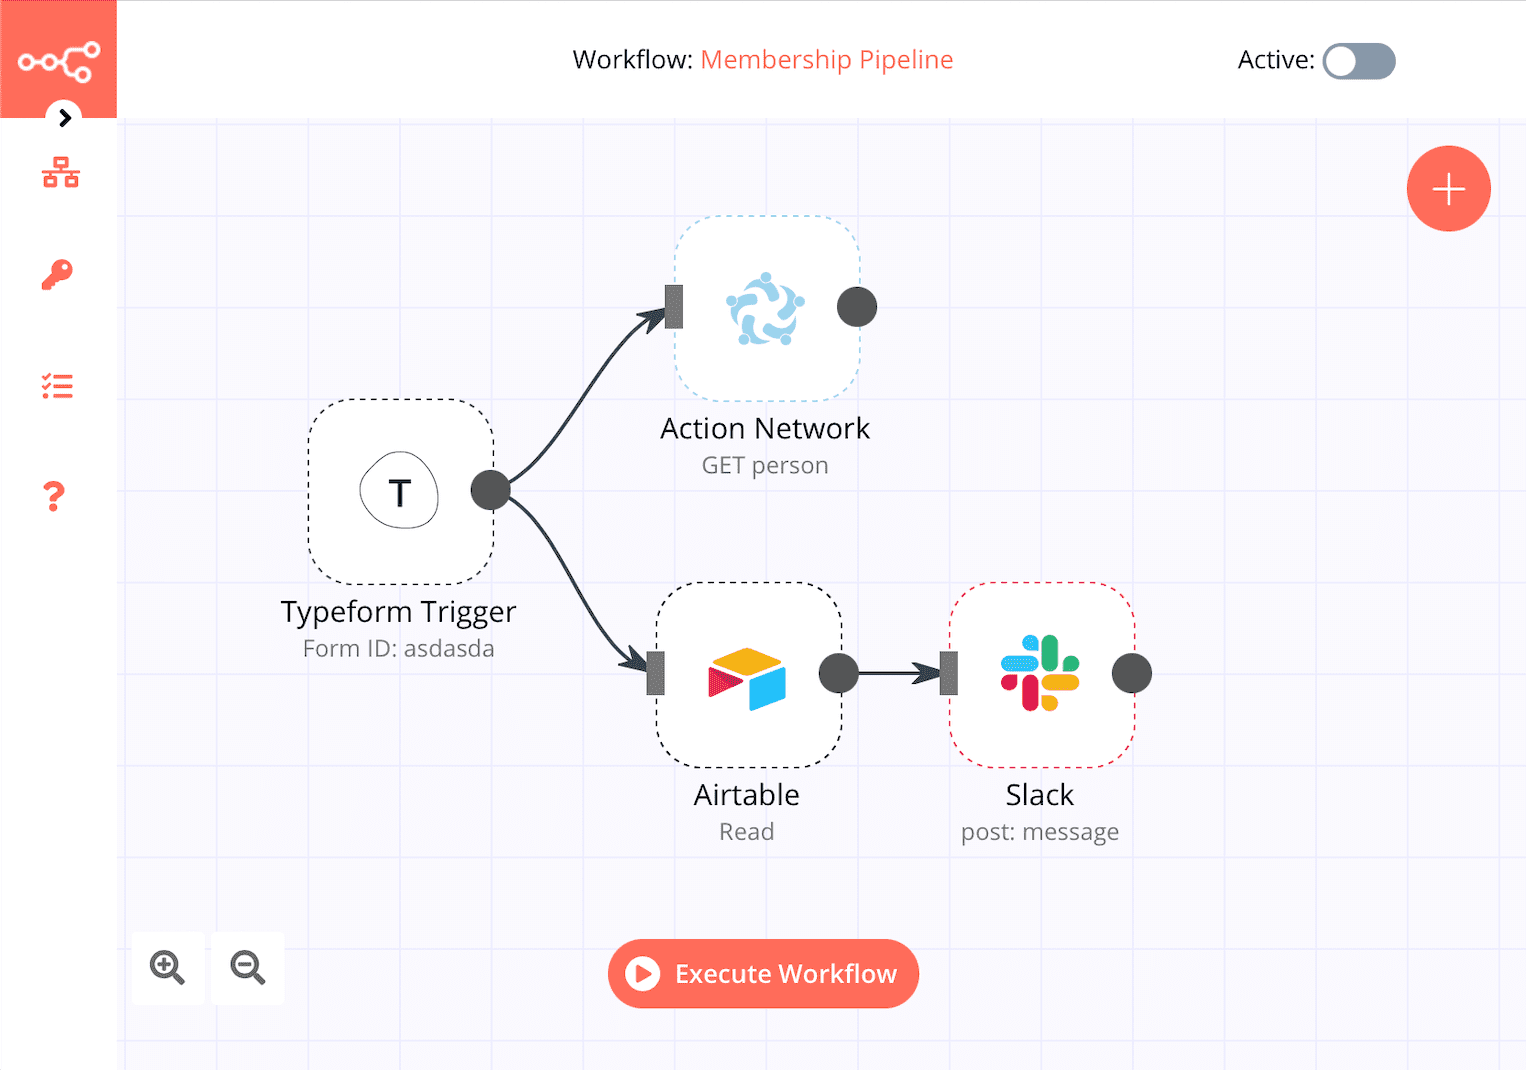 A diagram from n8n showing Typeform submissions connected to both Action Network and Airtable and then, from Airtable, posting a Slack message.